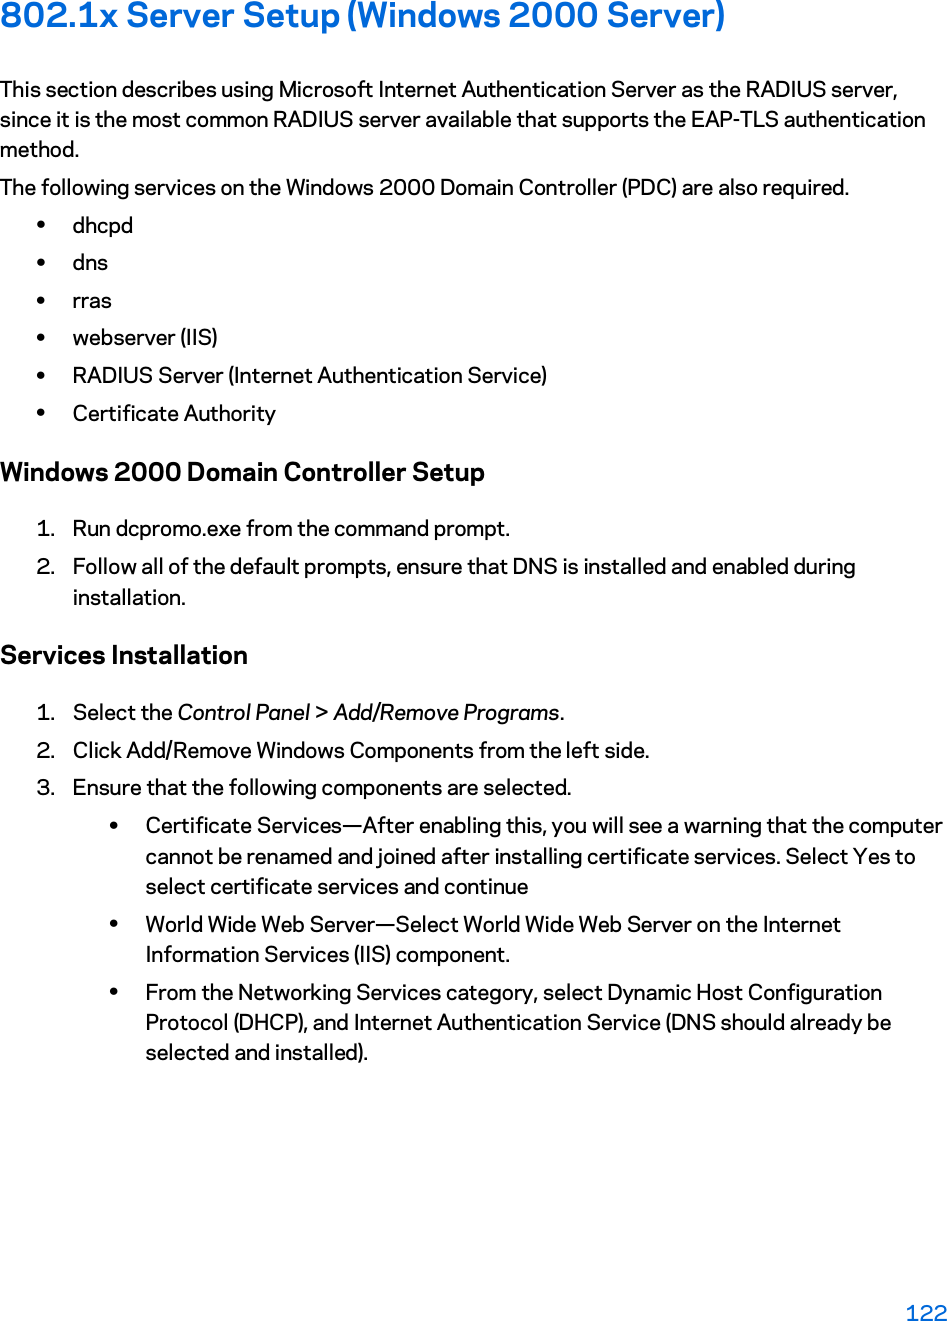 802.1x Server Setup (Windows 2000 Server) This section describes using Microsoft Internet Authentication Server as the RADIUS server, since it is the most common RADIUS server available that supports the EAP-TLS authentication method.  The following services on the Windows 2000 Domain Controller (PDC) are also required. xdhcpd  xdns  xrras xwebserver (IIS)  xRADIUS Server (Internet Authentication Service)  xCertificate Authority Windows 2000 Domain Controller Setup 1. Run dcpromo.exe from the command prompt.  2. Follow all of the default prompts, ensure that DNS is installed and enabled during installation.  Services Installation 1. Select the Control Panel &gt; Add/Remove Programs.  2. Click Add/Remove Windows Components from the left side.  3. Ensure that the following components are selected. xCertificate Services—After enabling this, you will see a warning that the computer cannot be renamed and joined after installing certificate services. Select Yes to select certificate services and continue xWorld Wide Web Server—Select World Wide Web Server on the Internet Information Services (IIS) component. xFrom the Networking Services category, select Dynamic Host Configuration Protocol (DHCP), and Internet Authentication Service (DNS should already be selected and installed). 122 